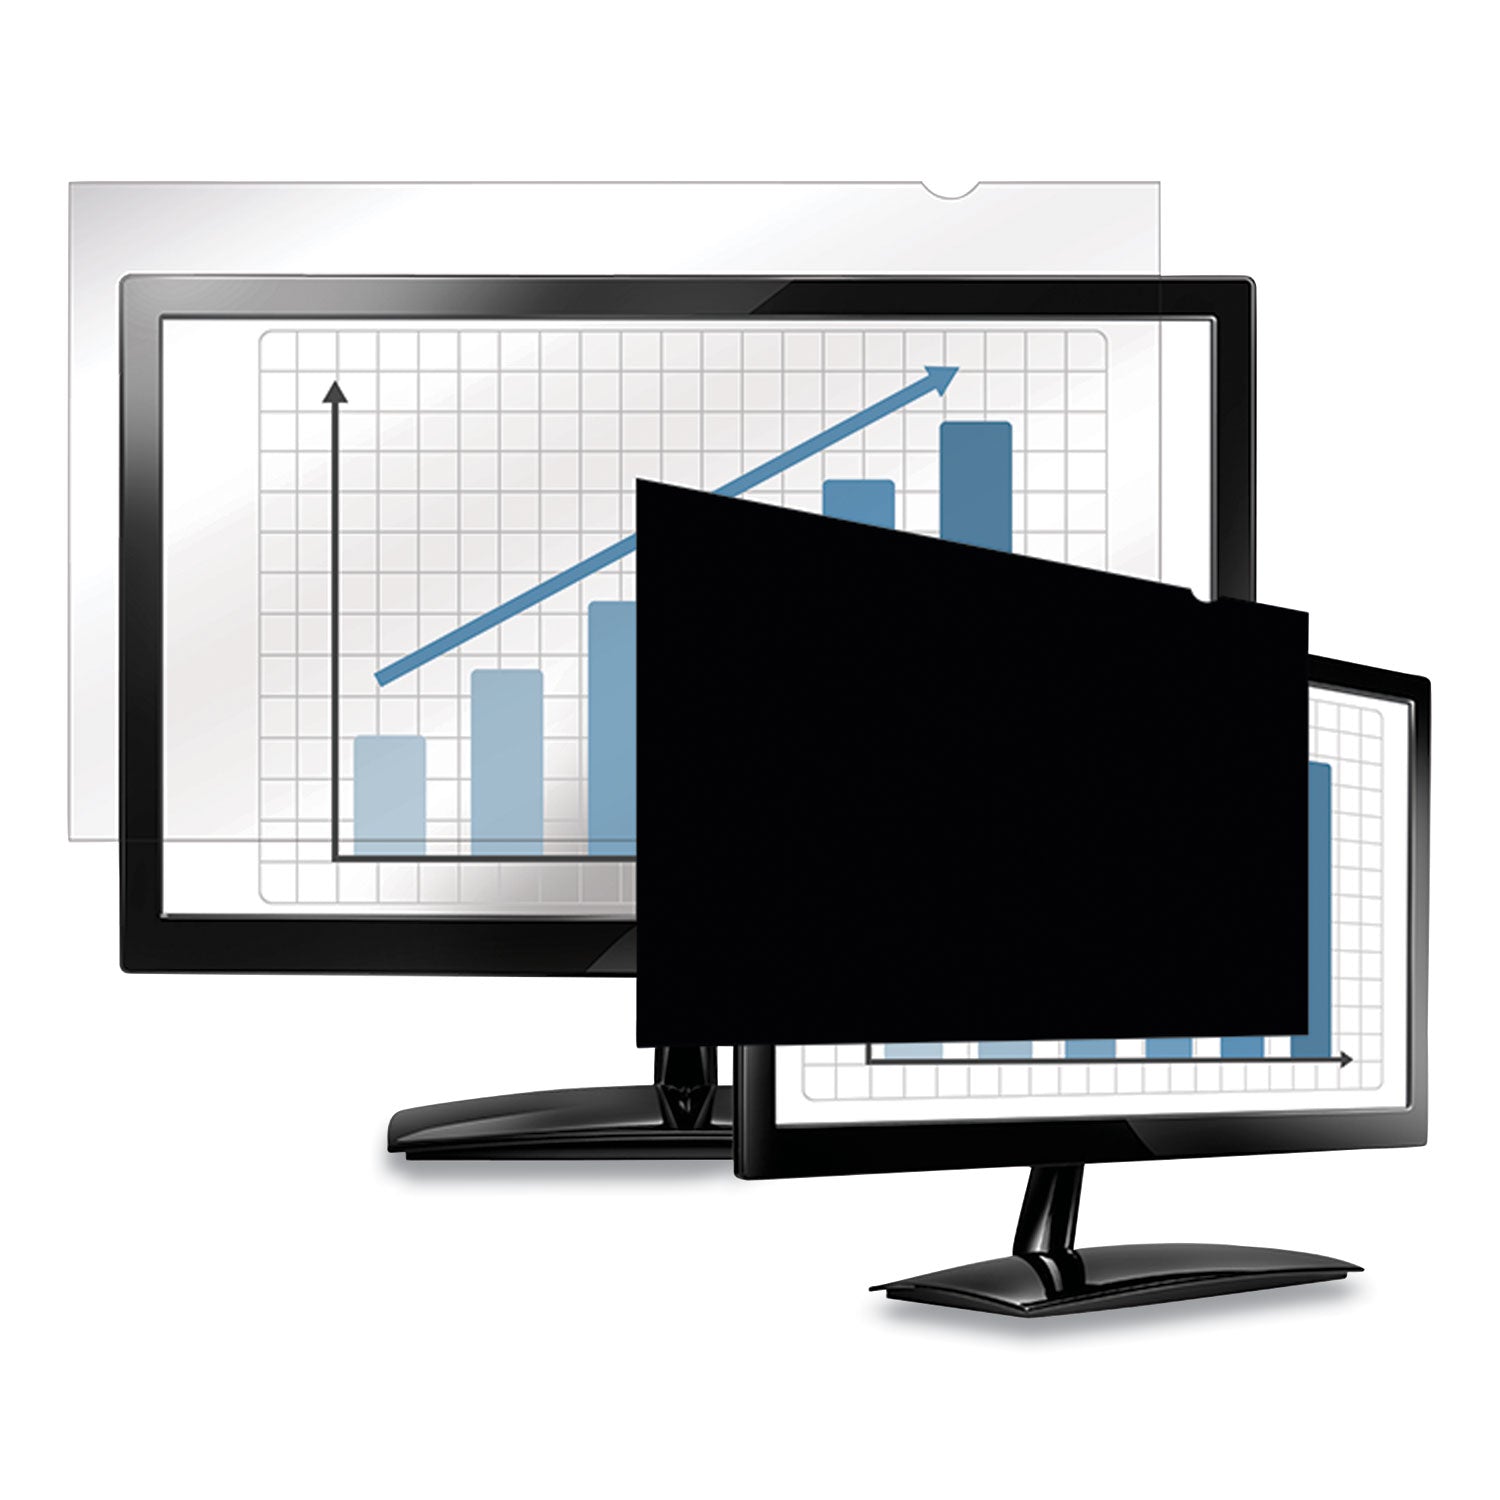 PrivaScreen Blackout Privacy Filter for 23" Widescreen Flat Panel Monitor, 16:9 Aspect Ratio - 